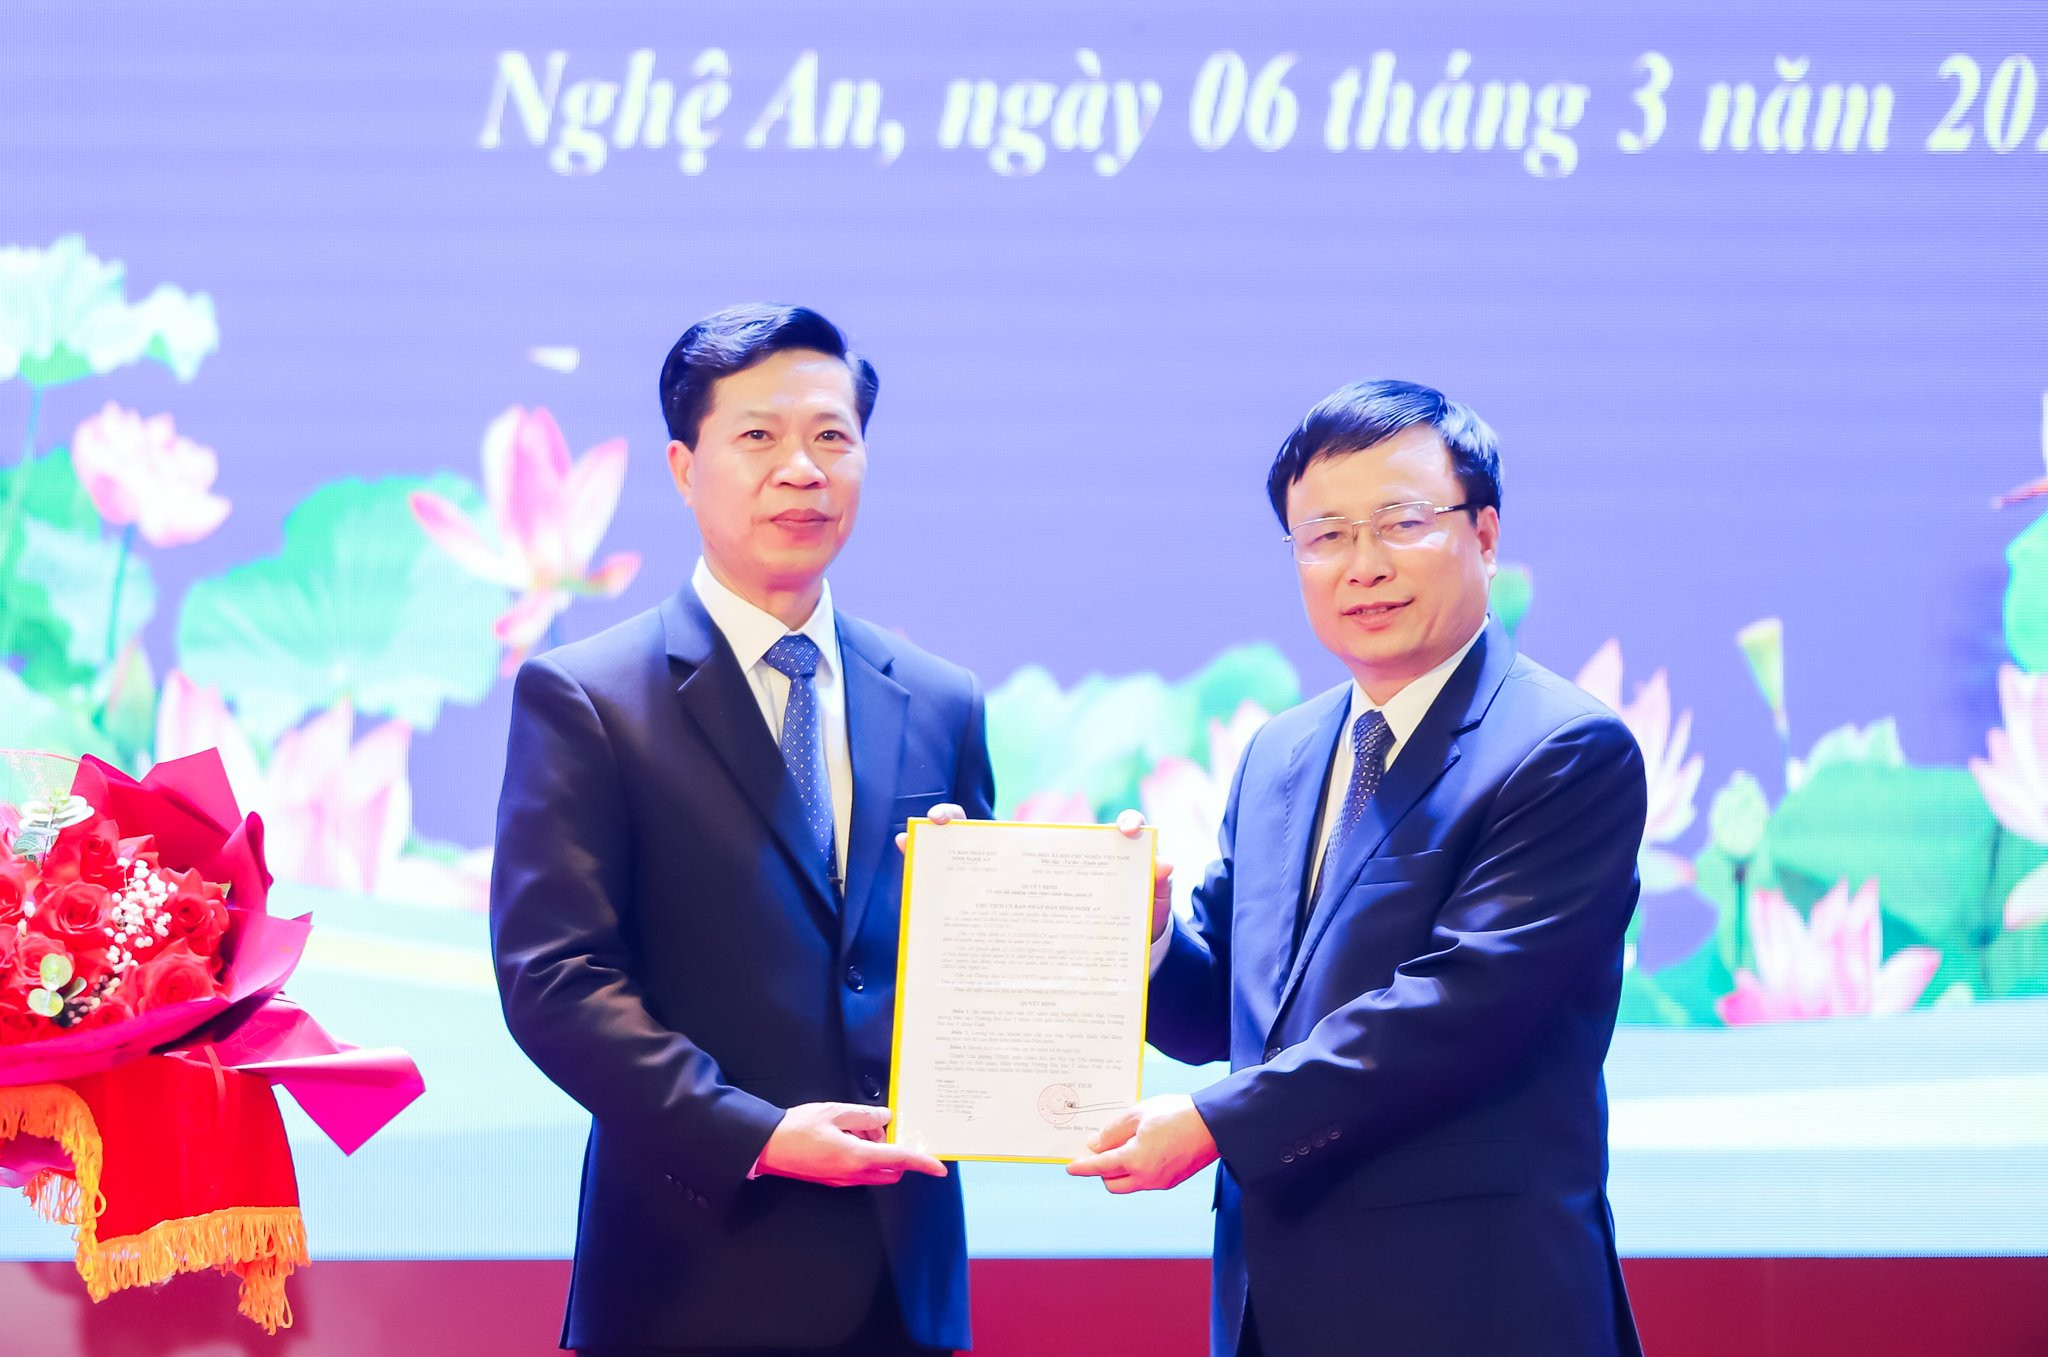 bna-trao-quyet-dinh-anh-thanh-le-777.jpg